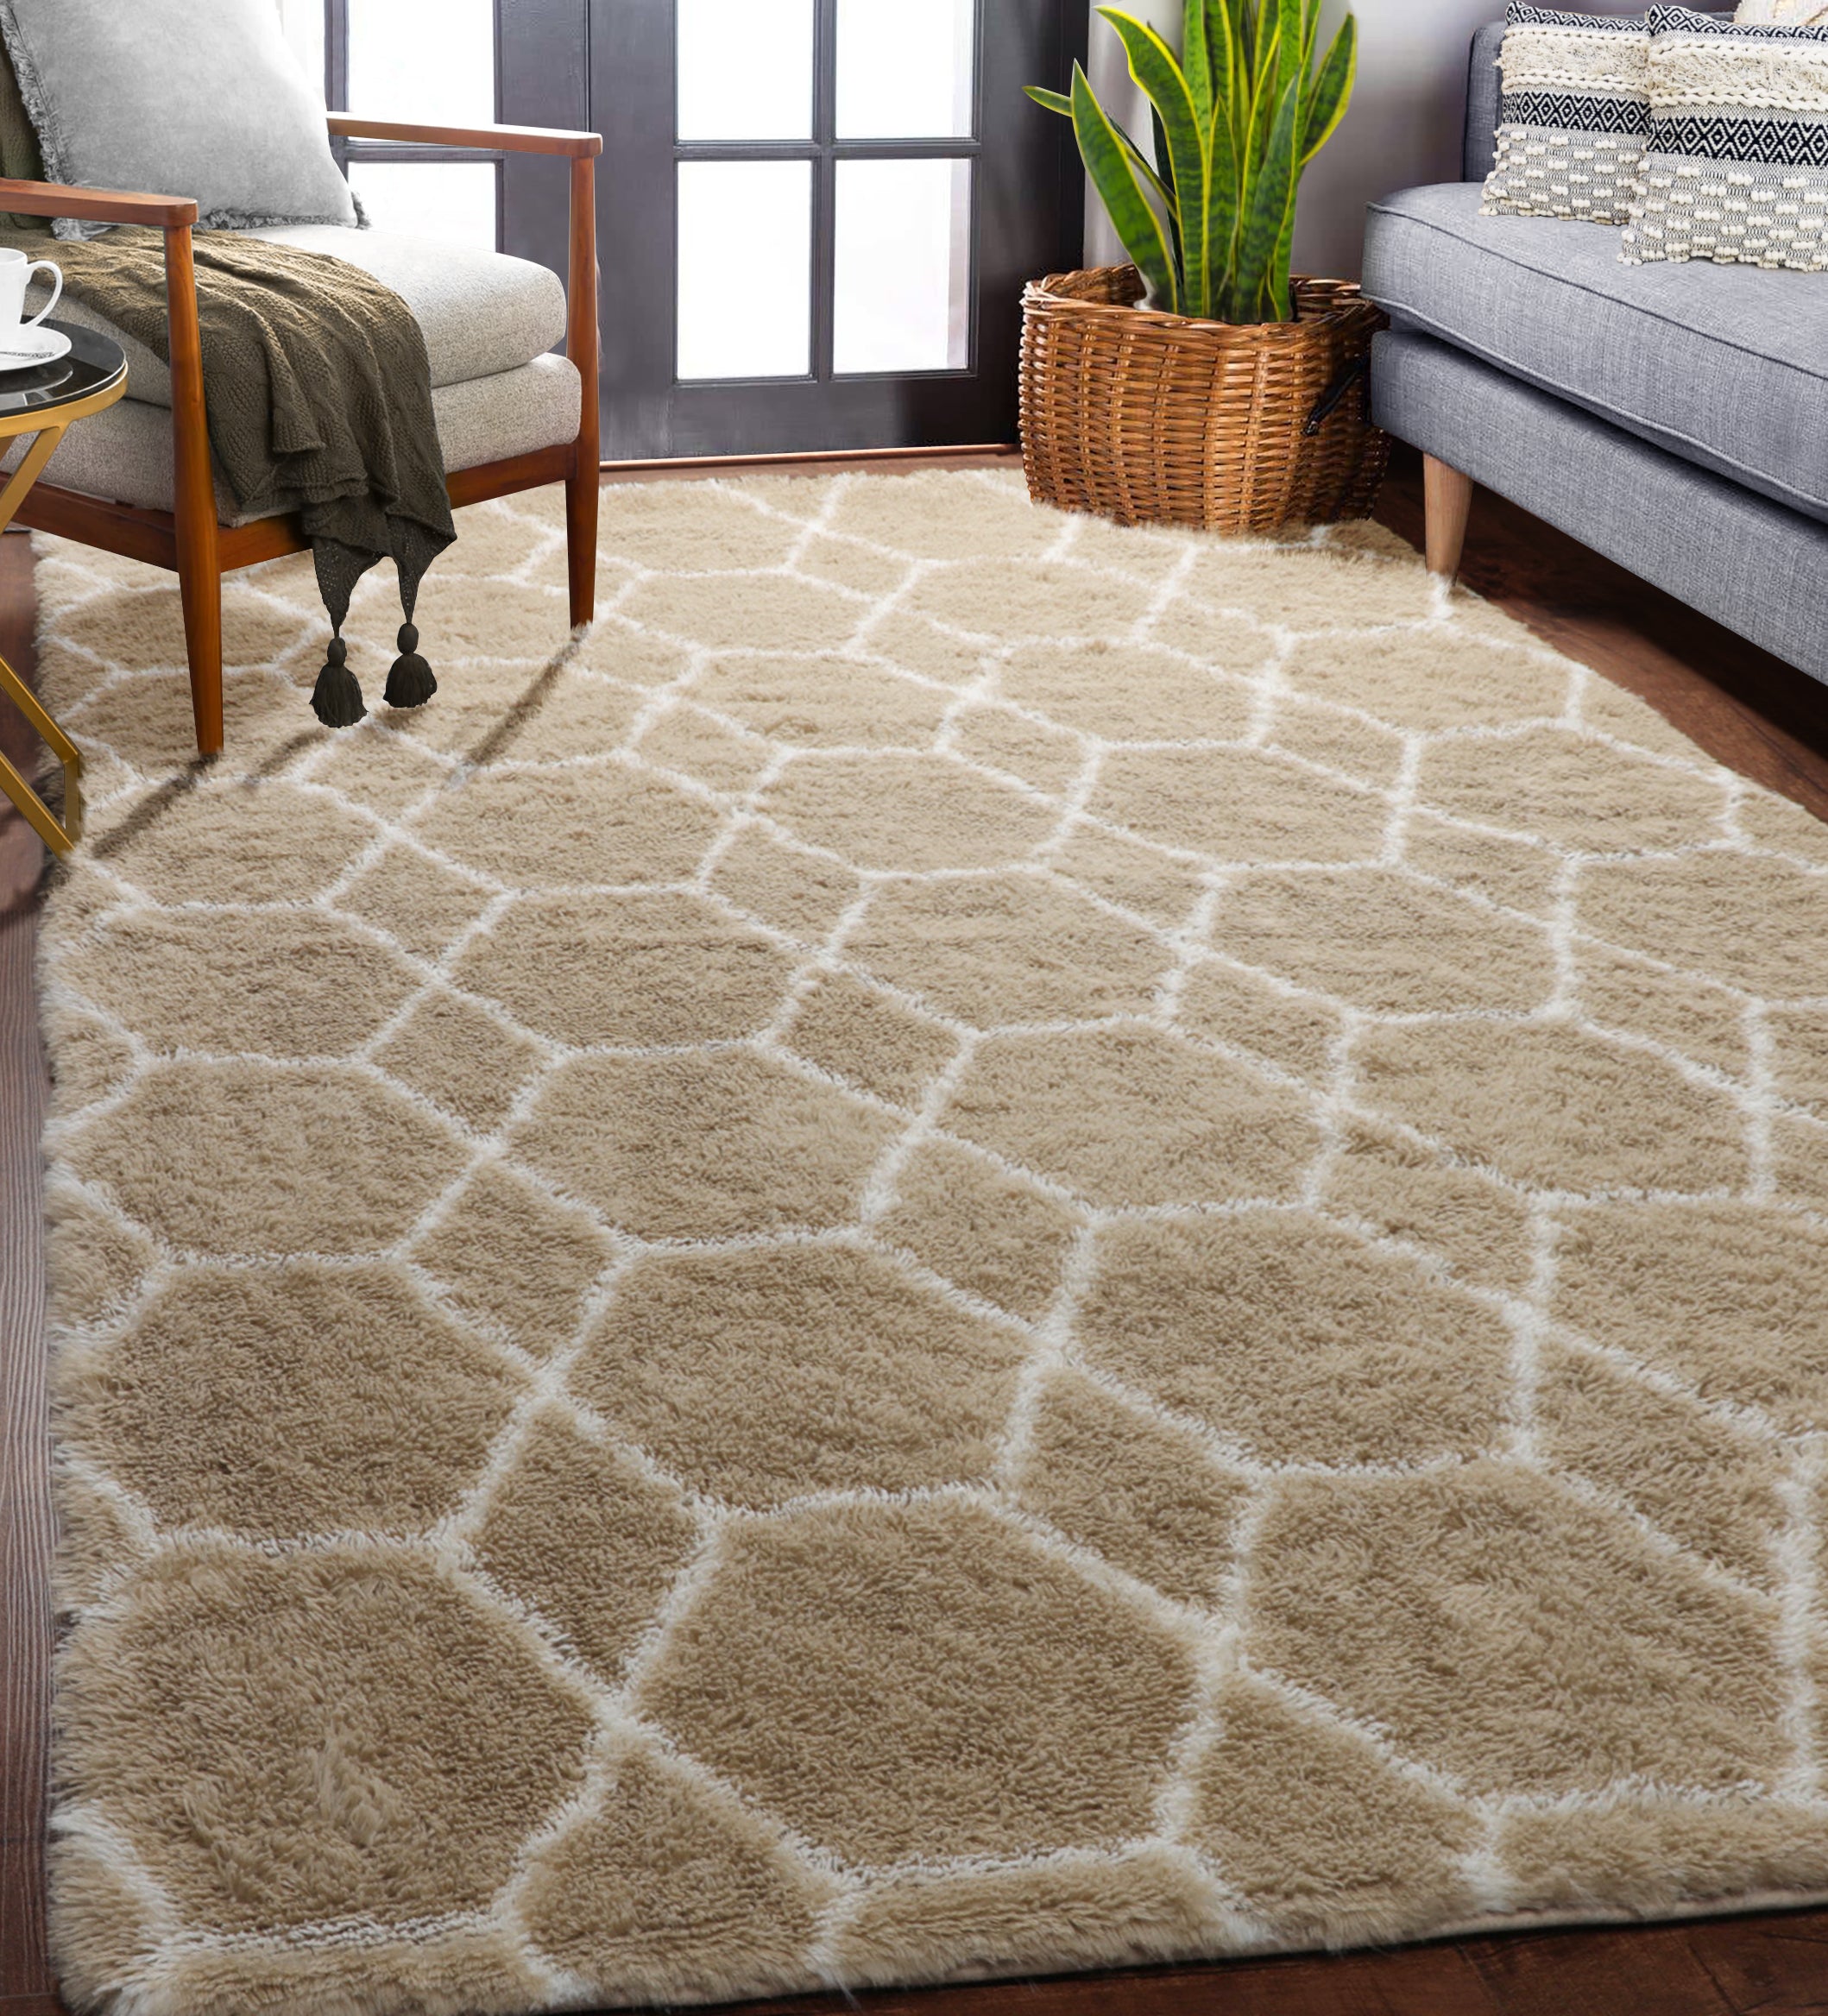 Beige and White Rug, Large Boho Geometric Area Rugs for Living Room, Shaggy Moroccan Floor Rug